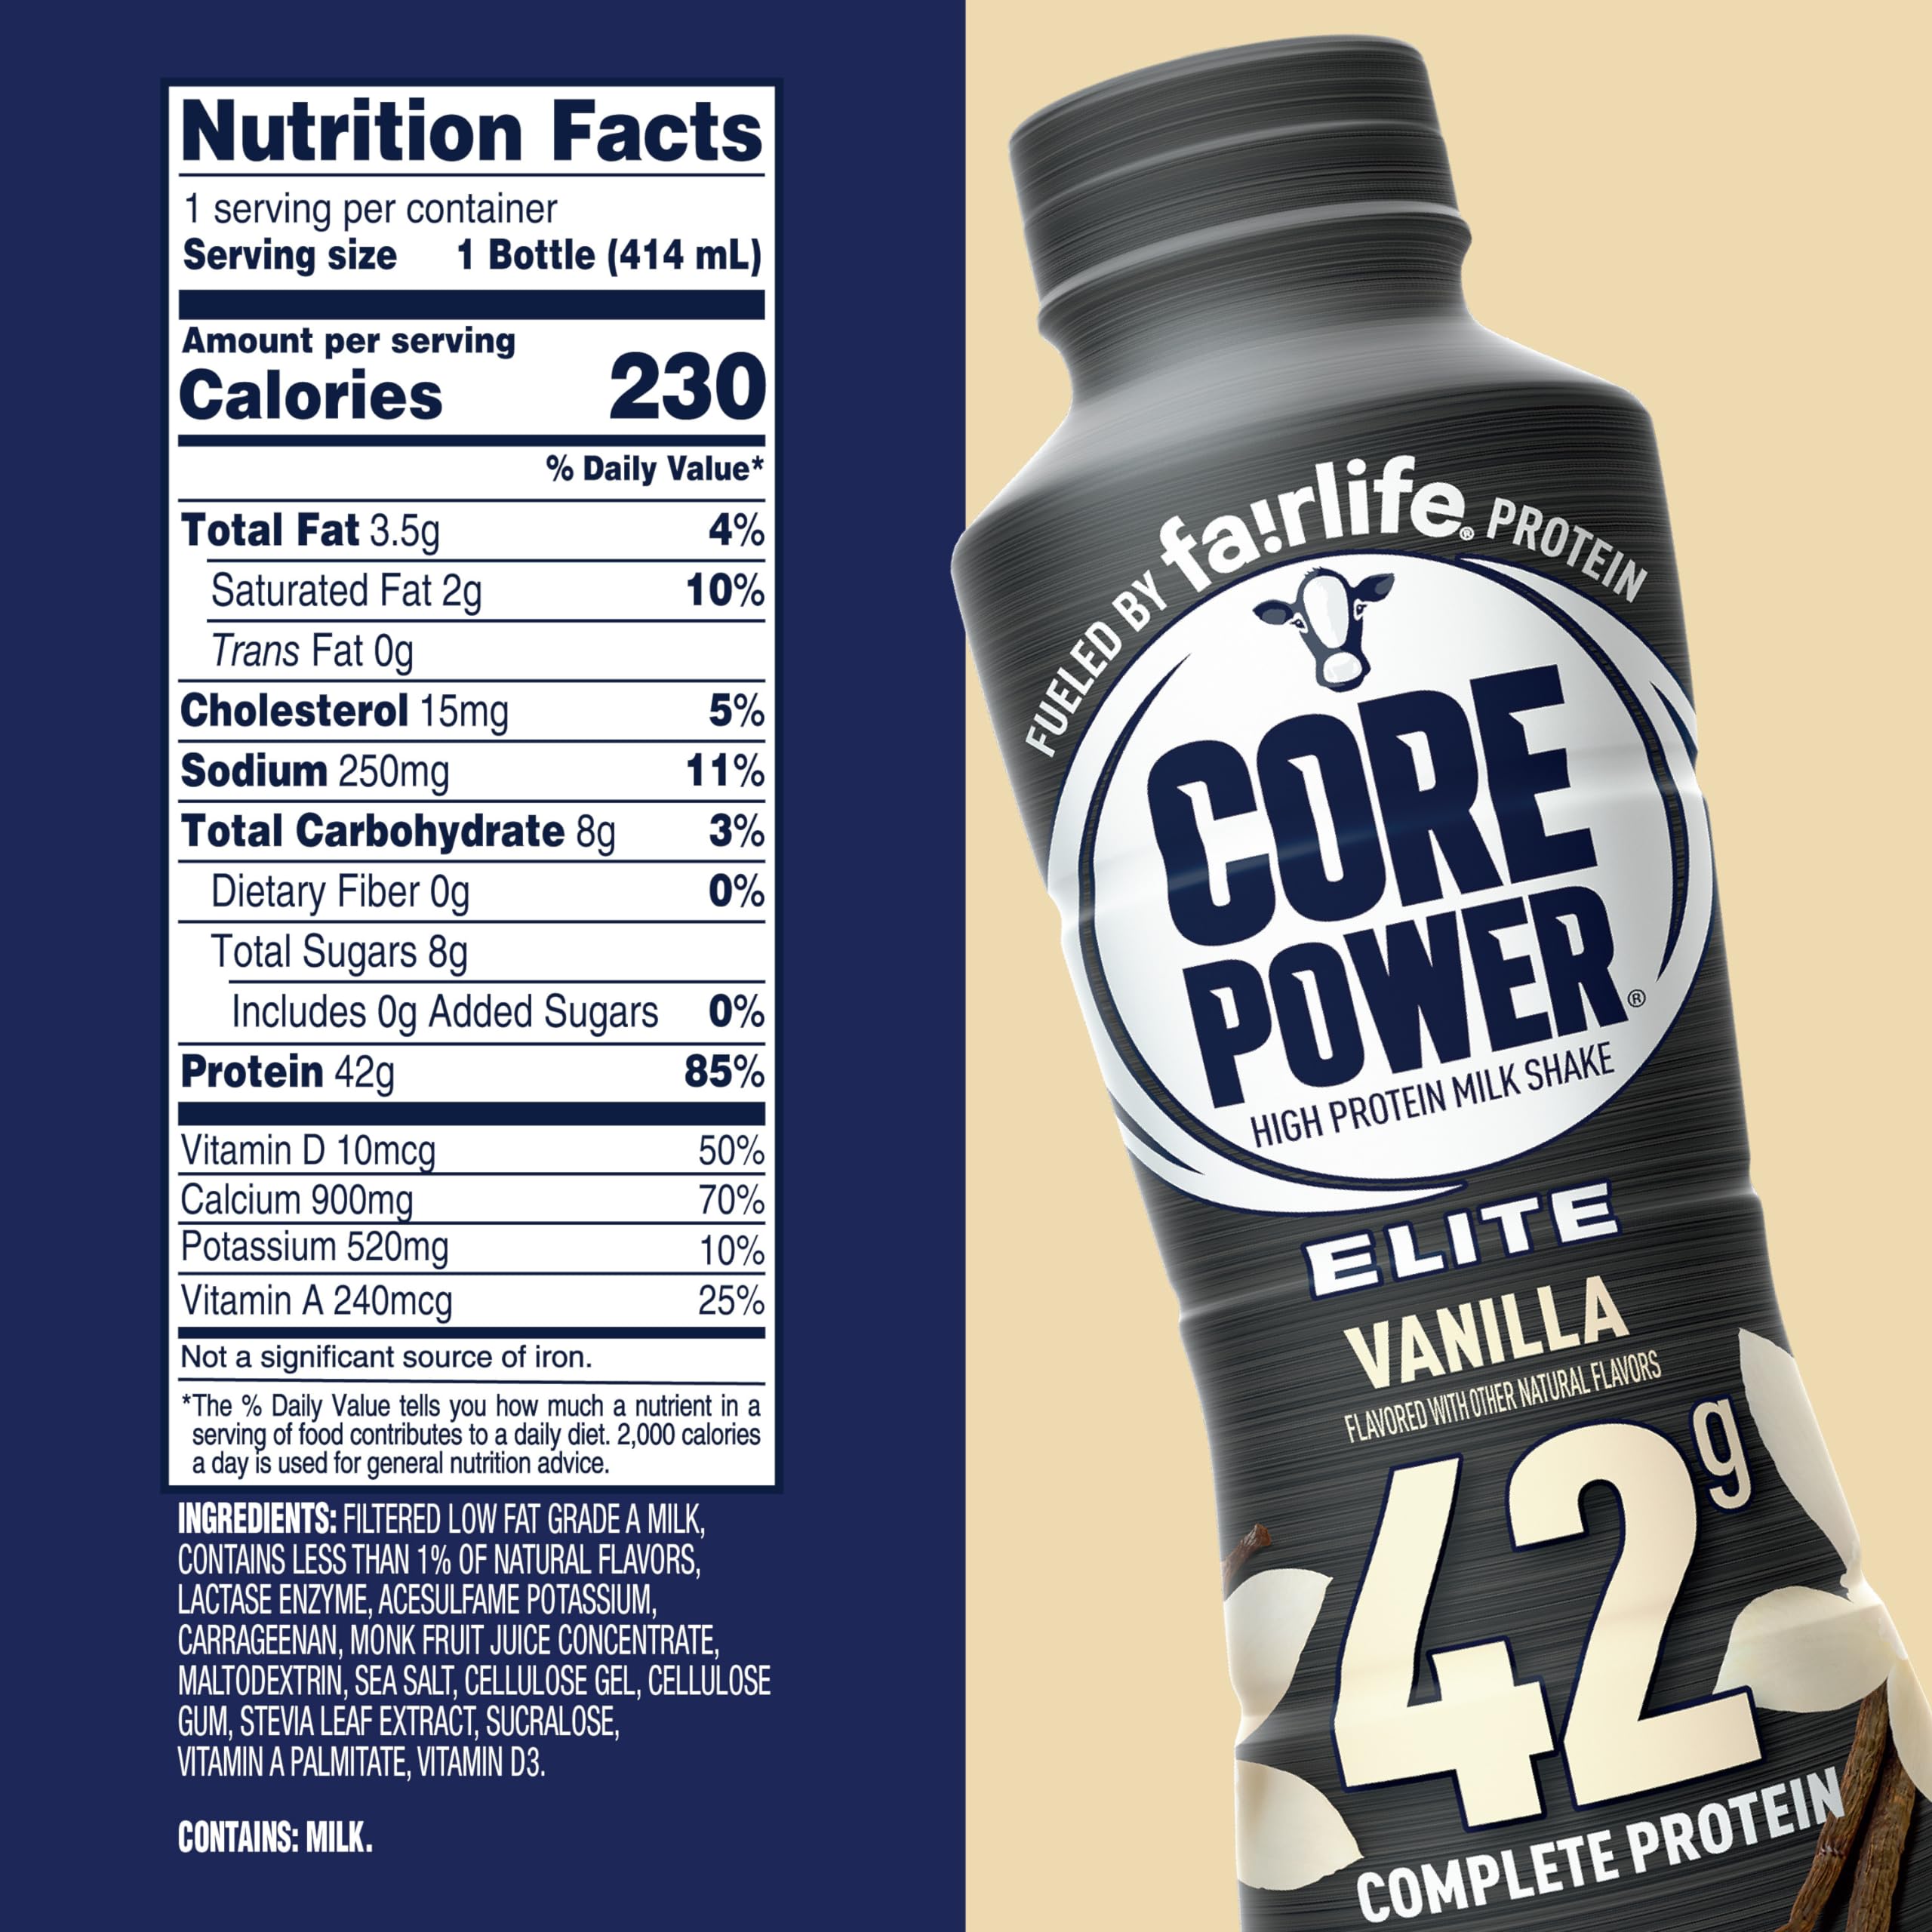 Core Power Fairlife Elite 42g High Protein Milk Shake, Ready To Drink for Workout Recovery, Vanilla, 14 Fl Oz (Pack of 12)